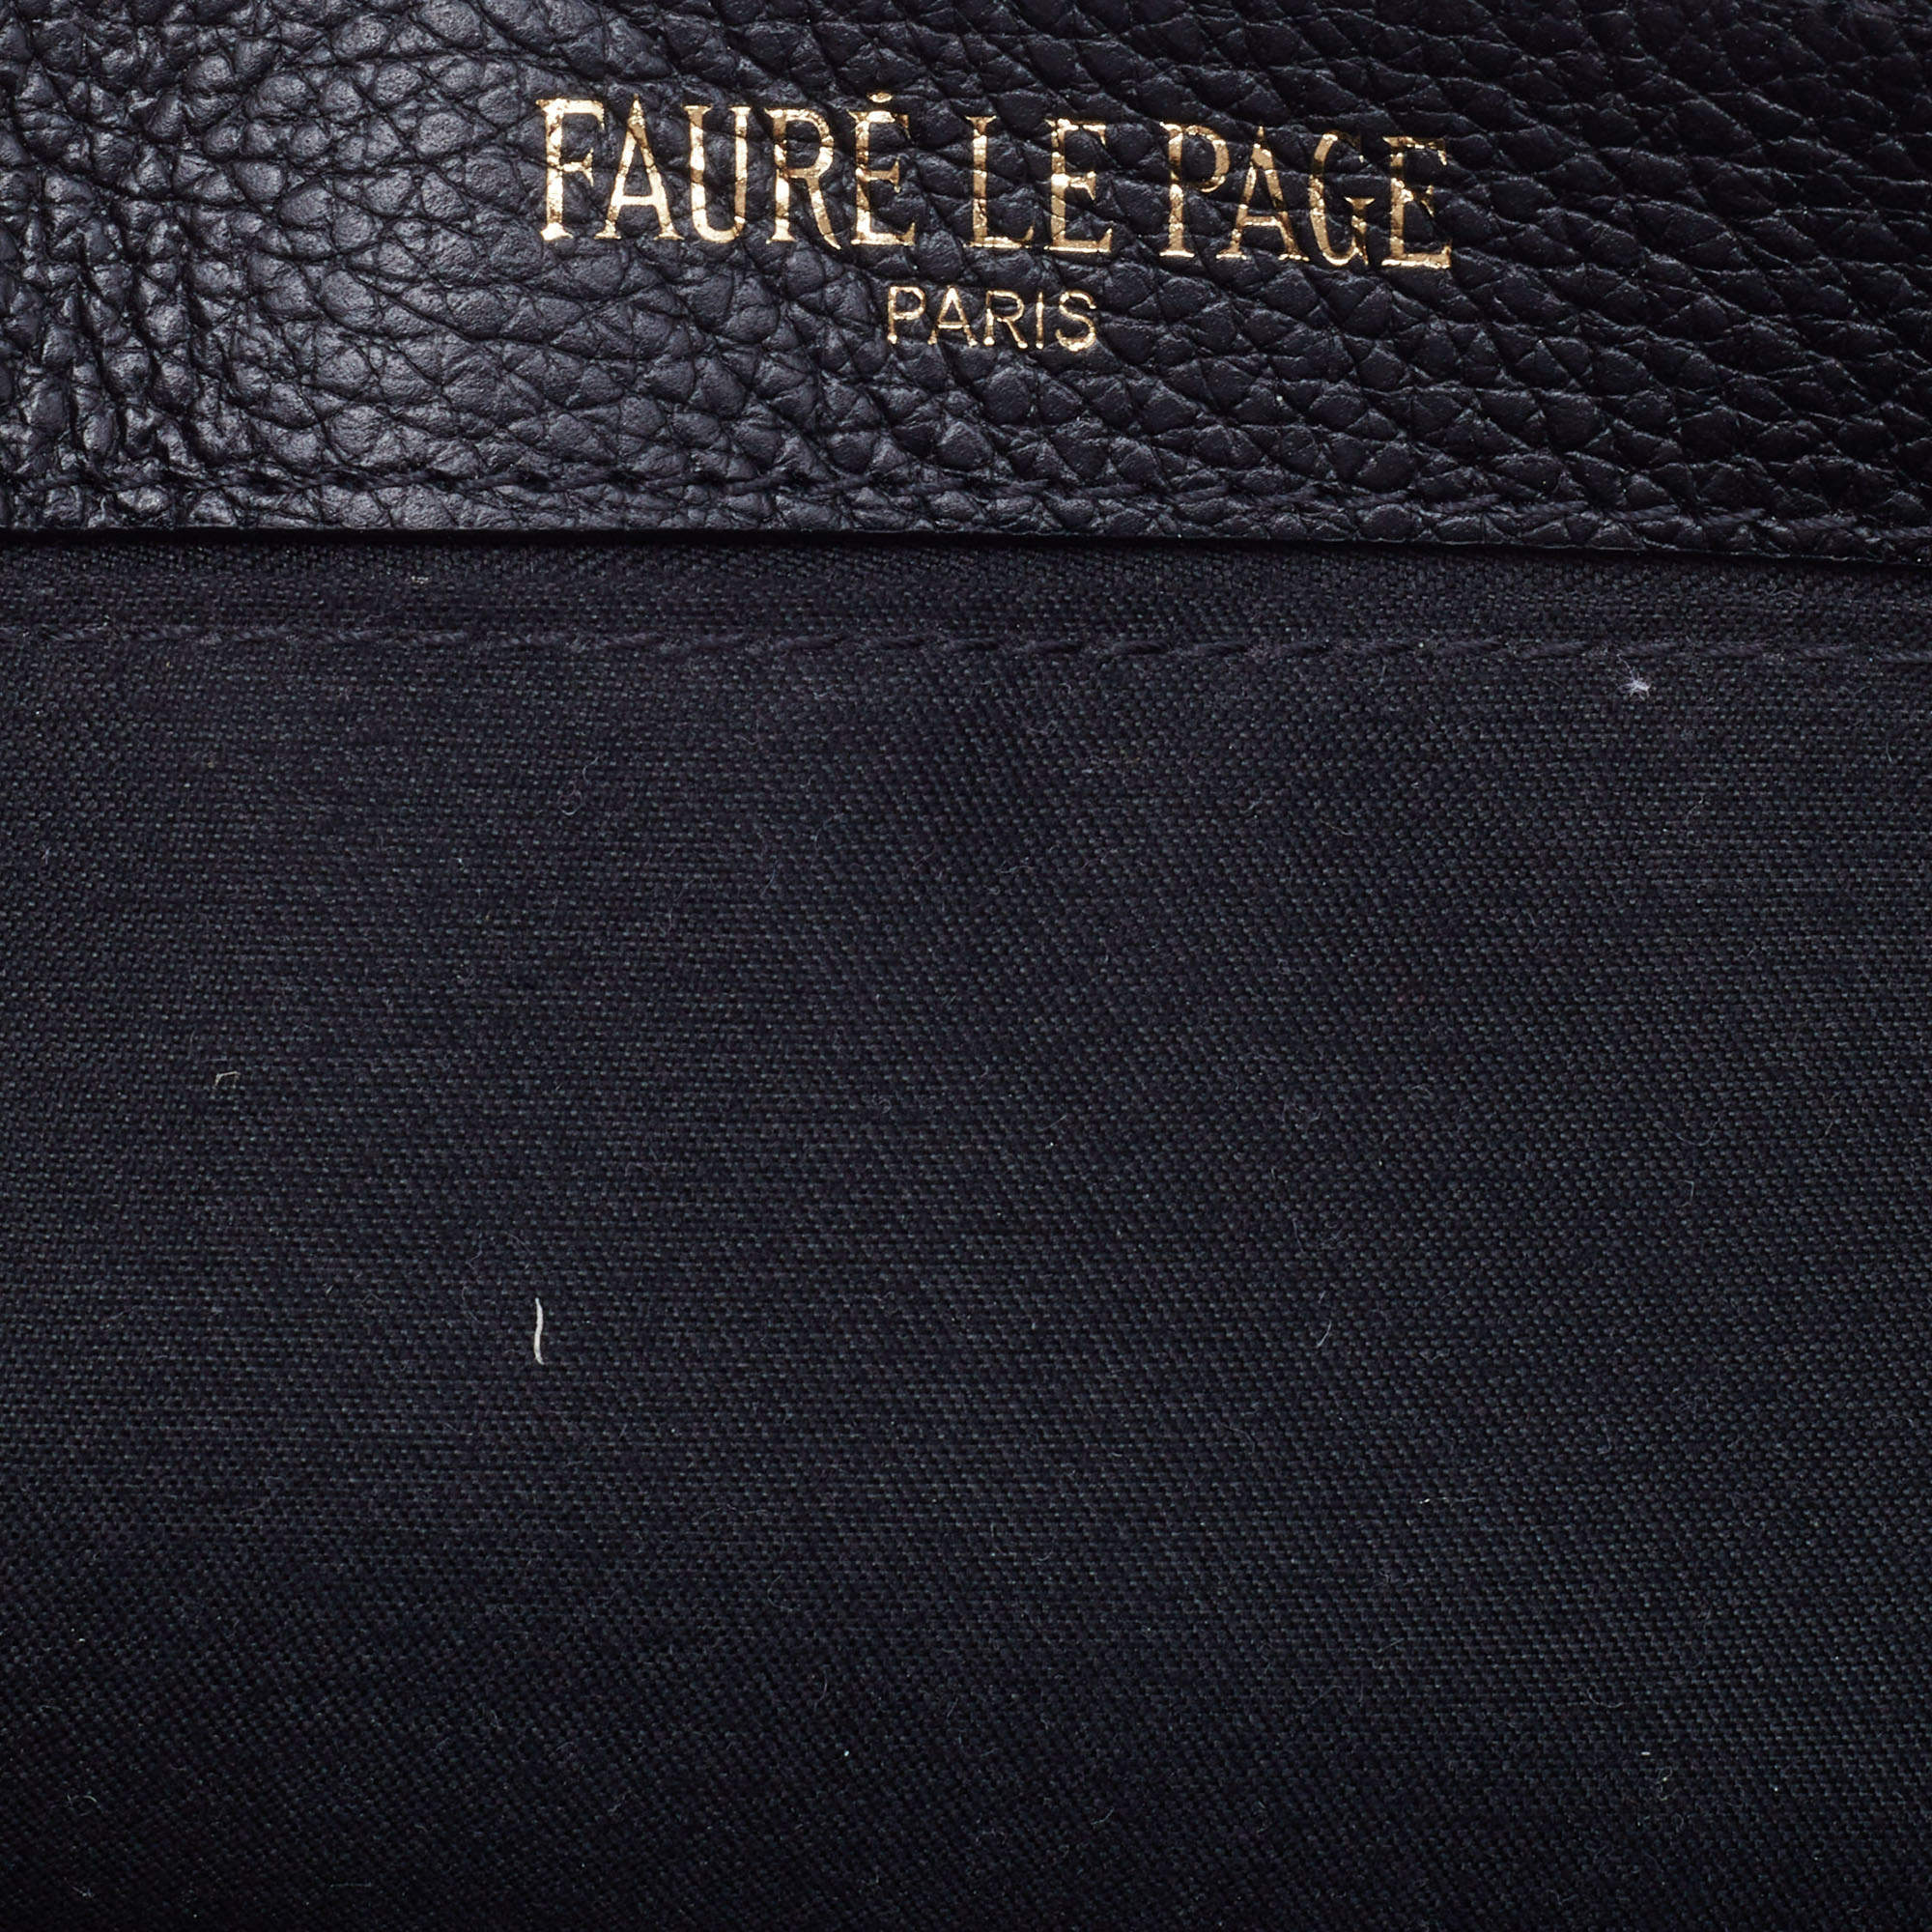 Faure Le Page Black Coated Canvas and Leather Daily Battle 19 Crossbody Bag  Faure Le Page